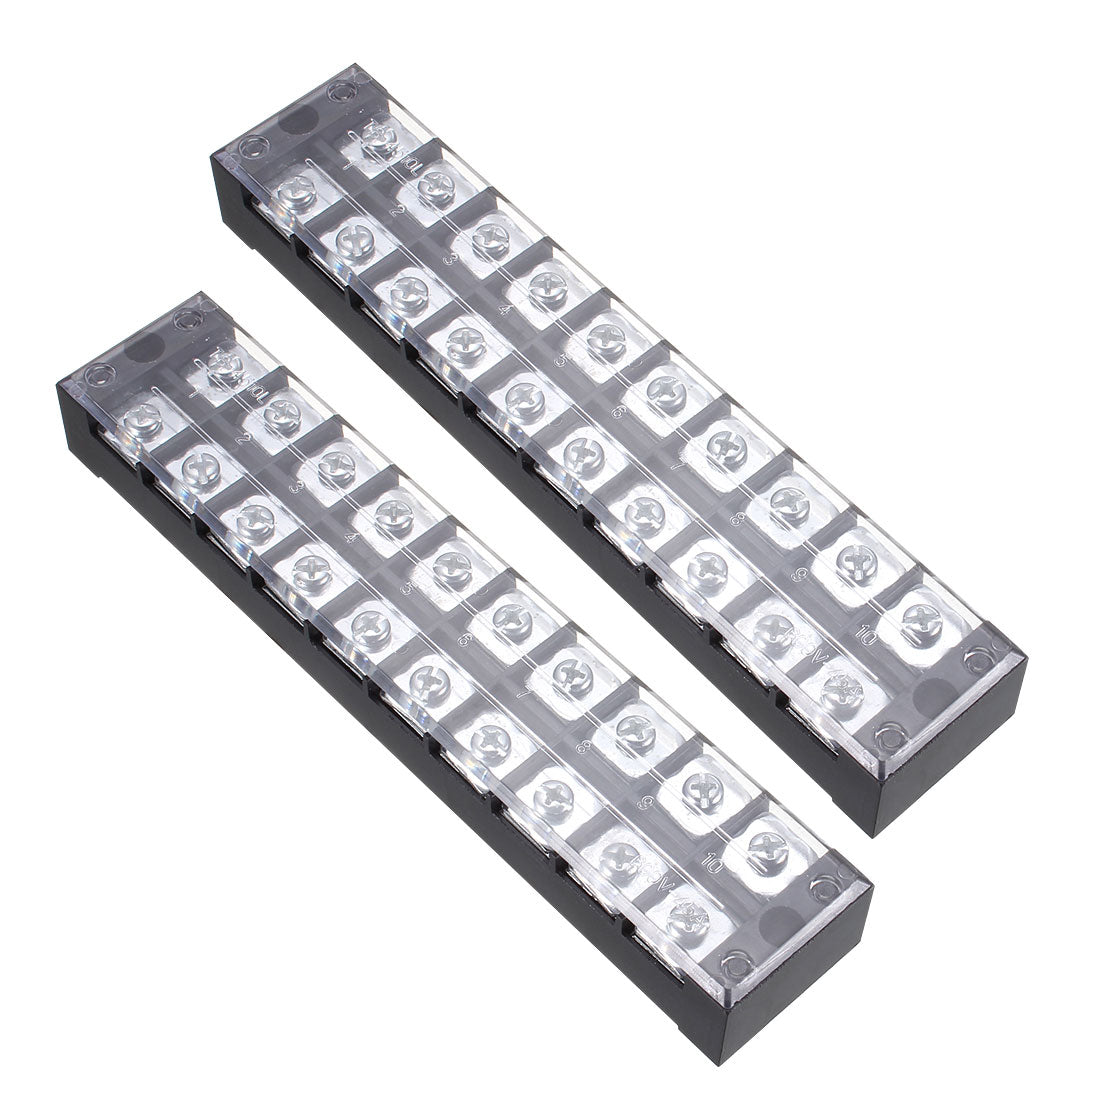 uxcell Uxcell 2 Pcs Dual Rows 10 Positions 600V 45A Cable Barrier Block Terminal Strip TB-4510L